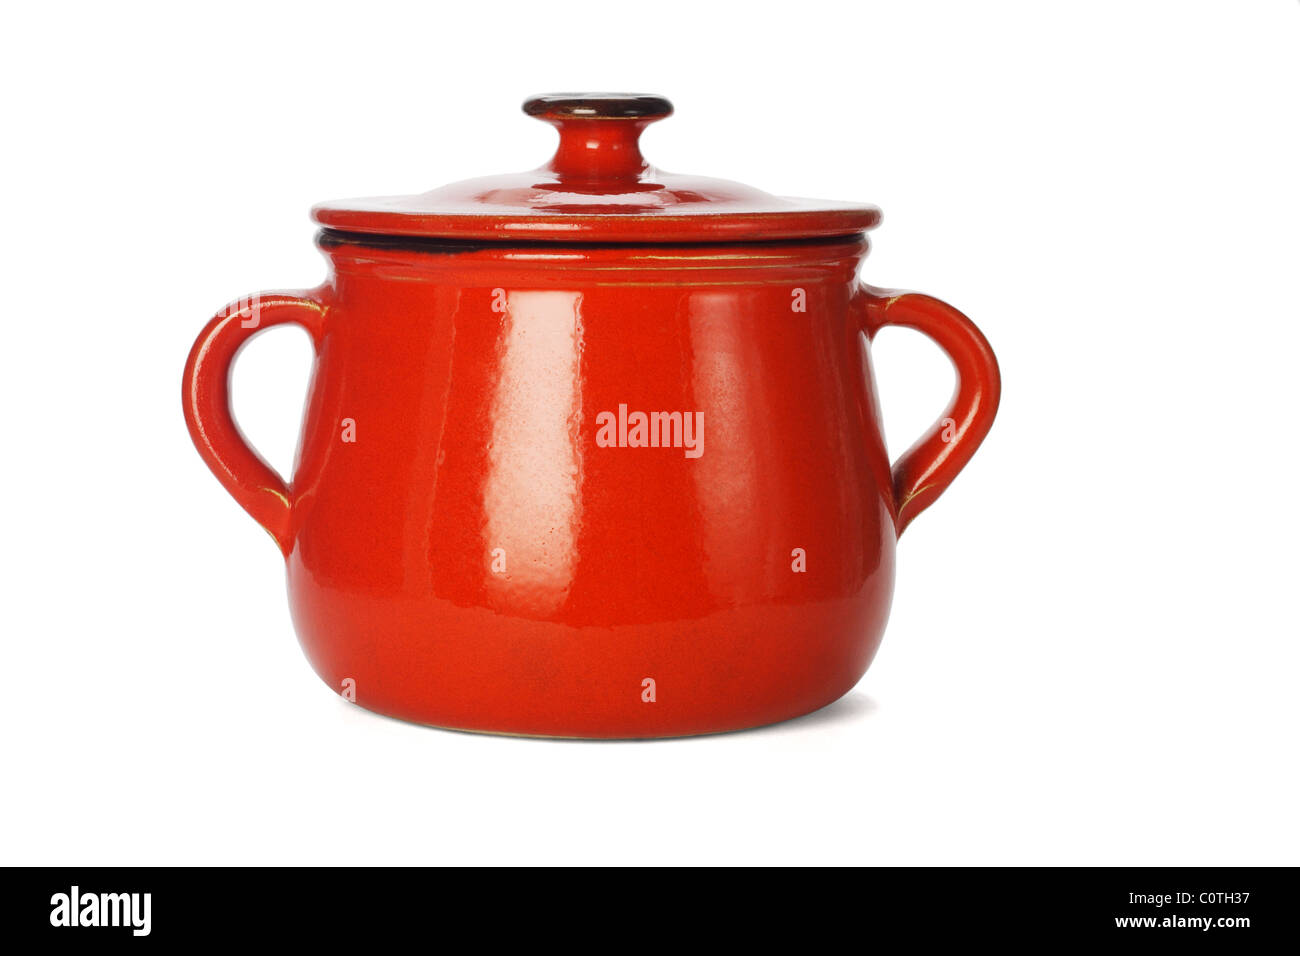 Red clay pot with lid on white background Stock Photo